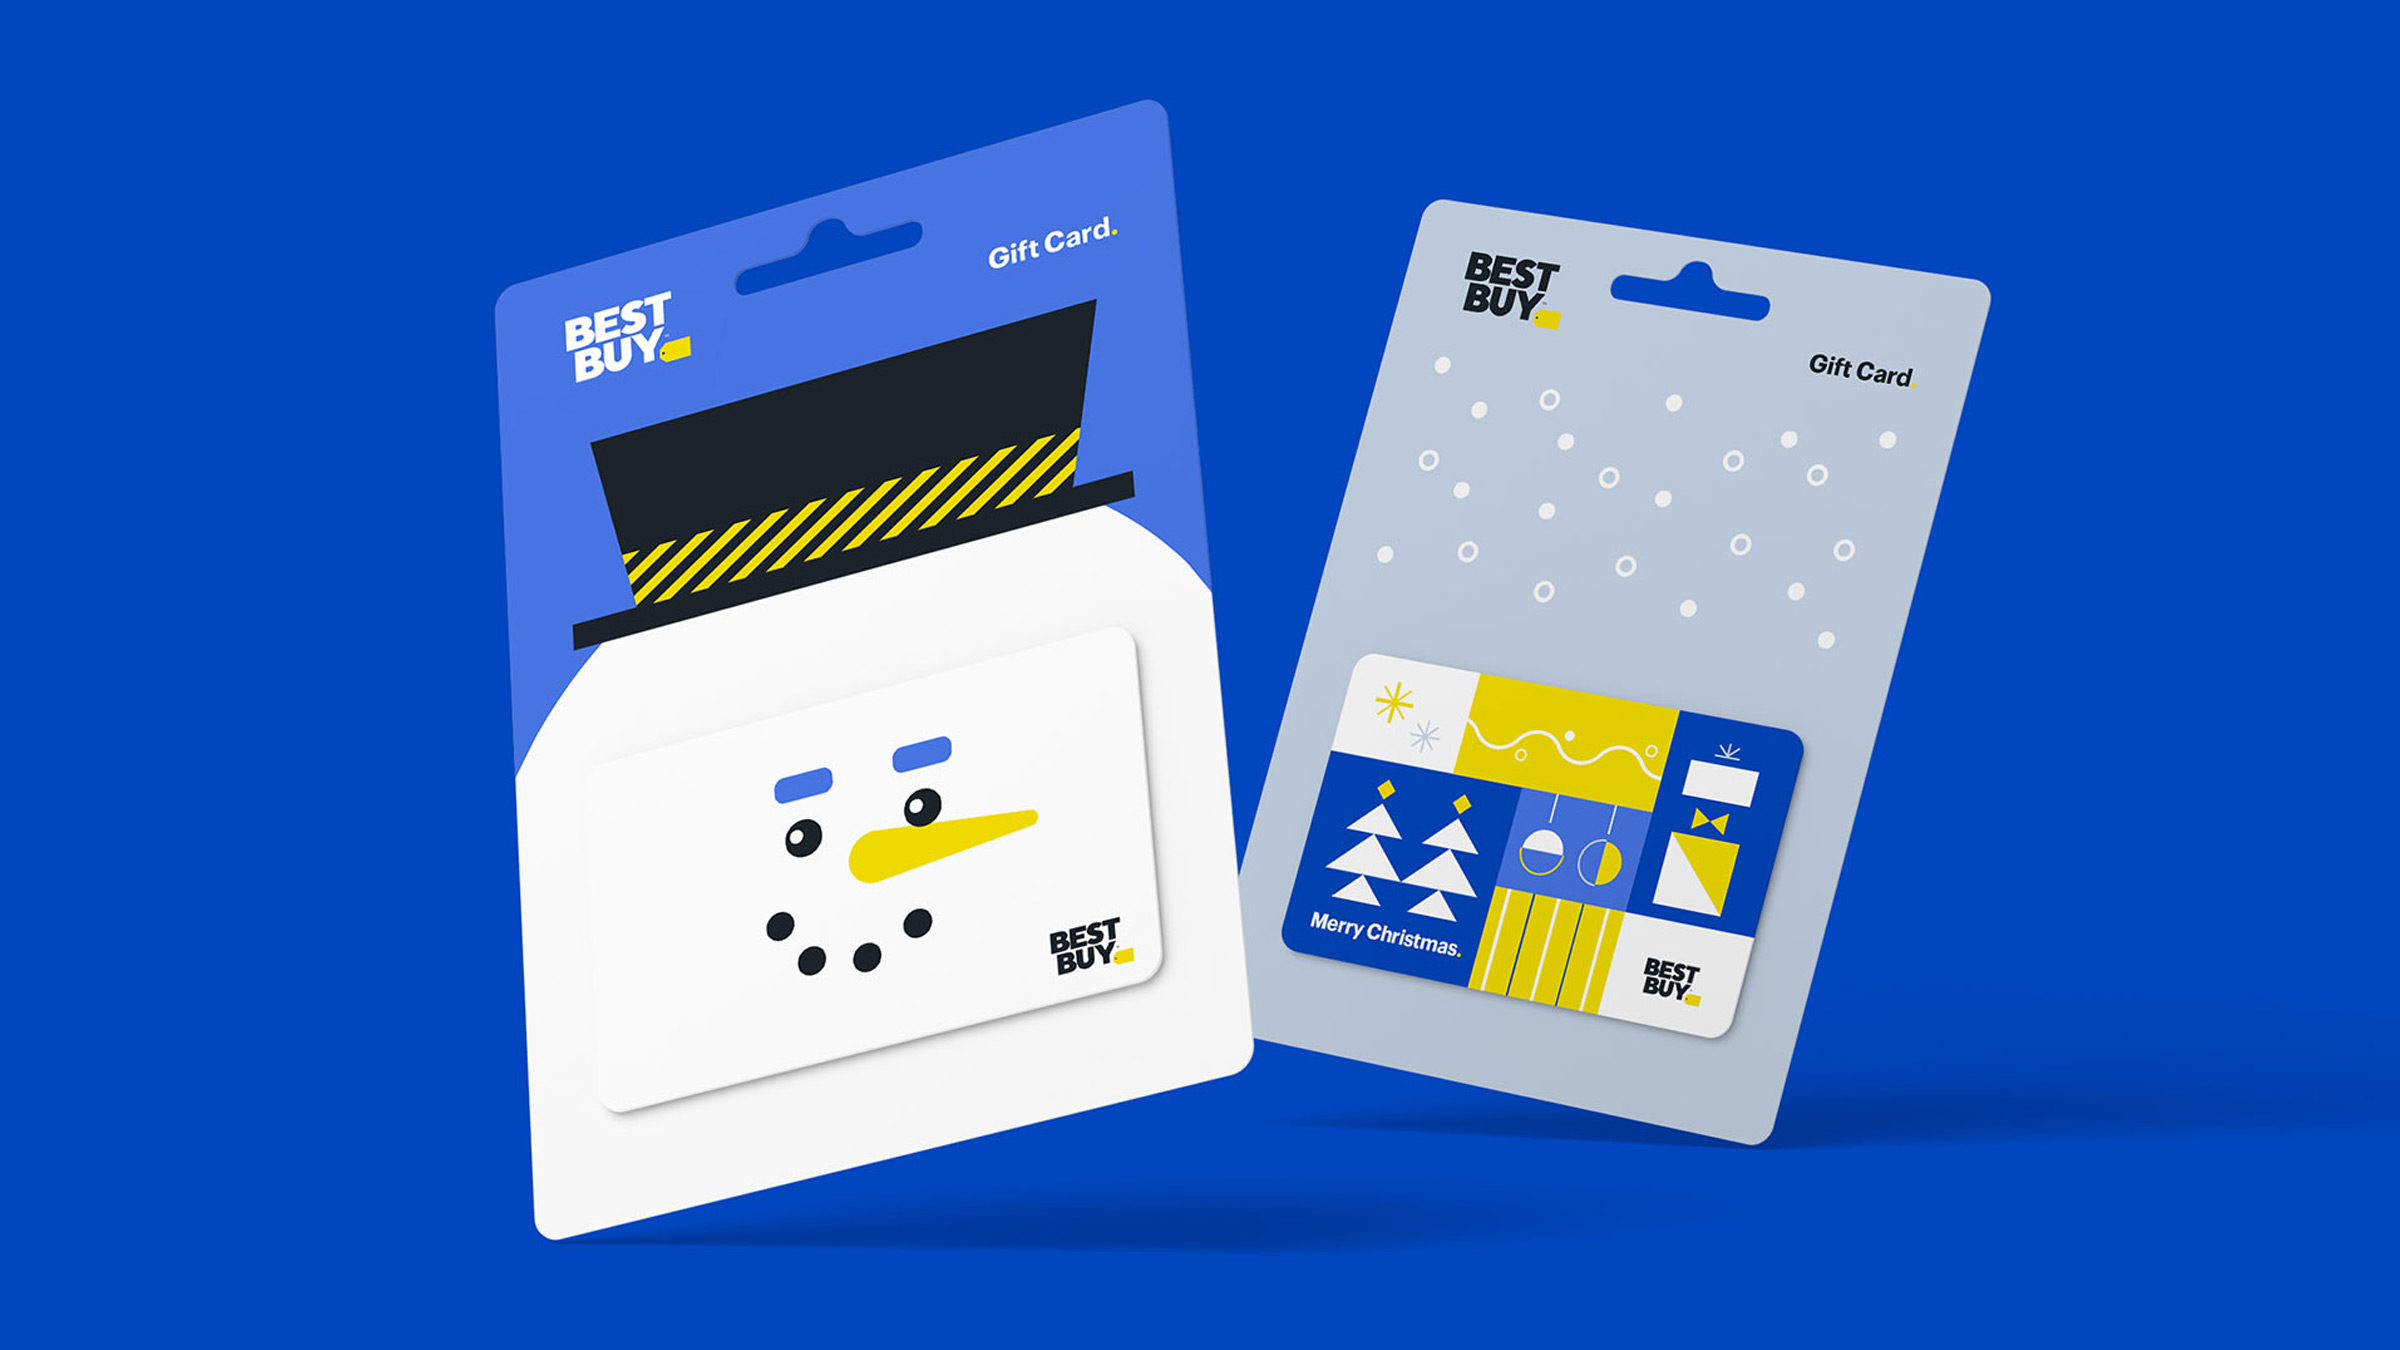 Best Buy holiday gift card designs